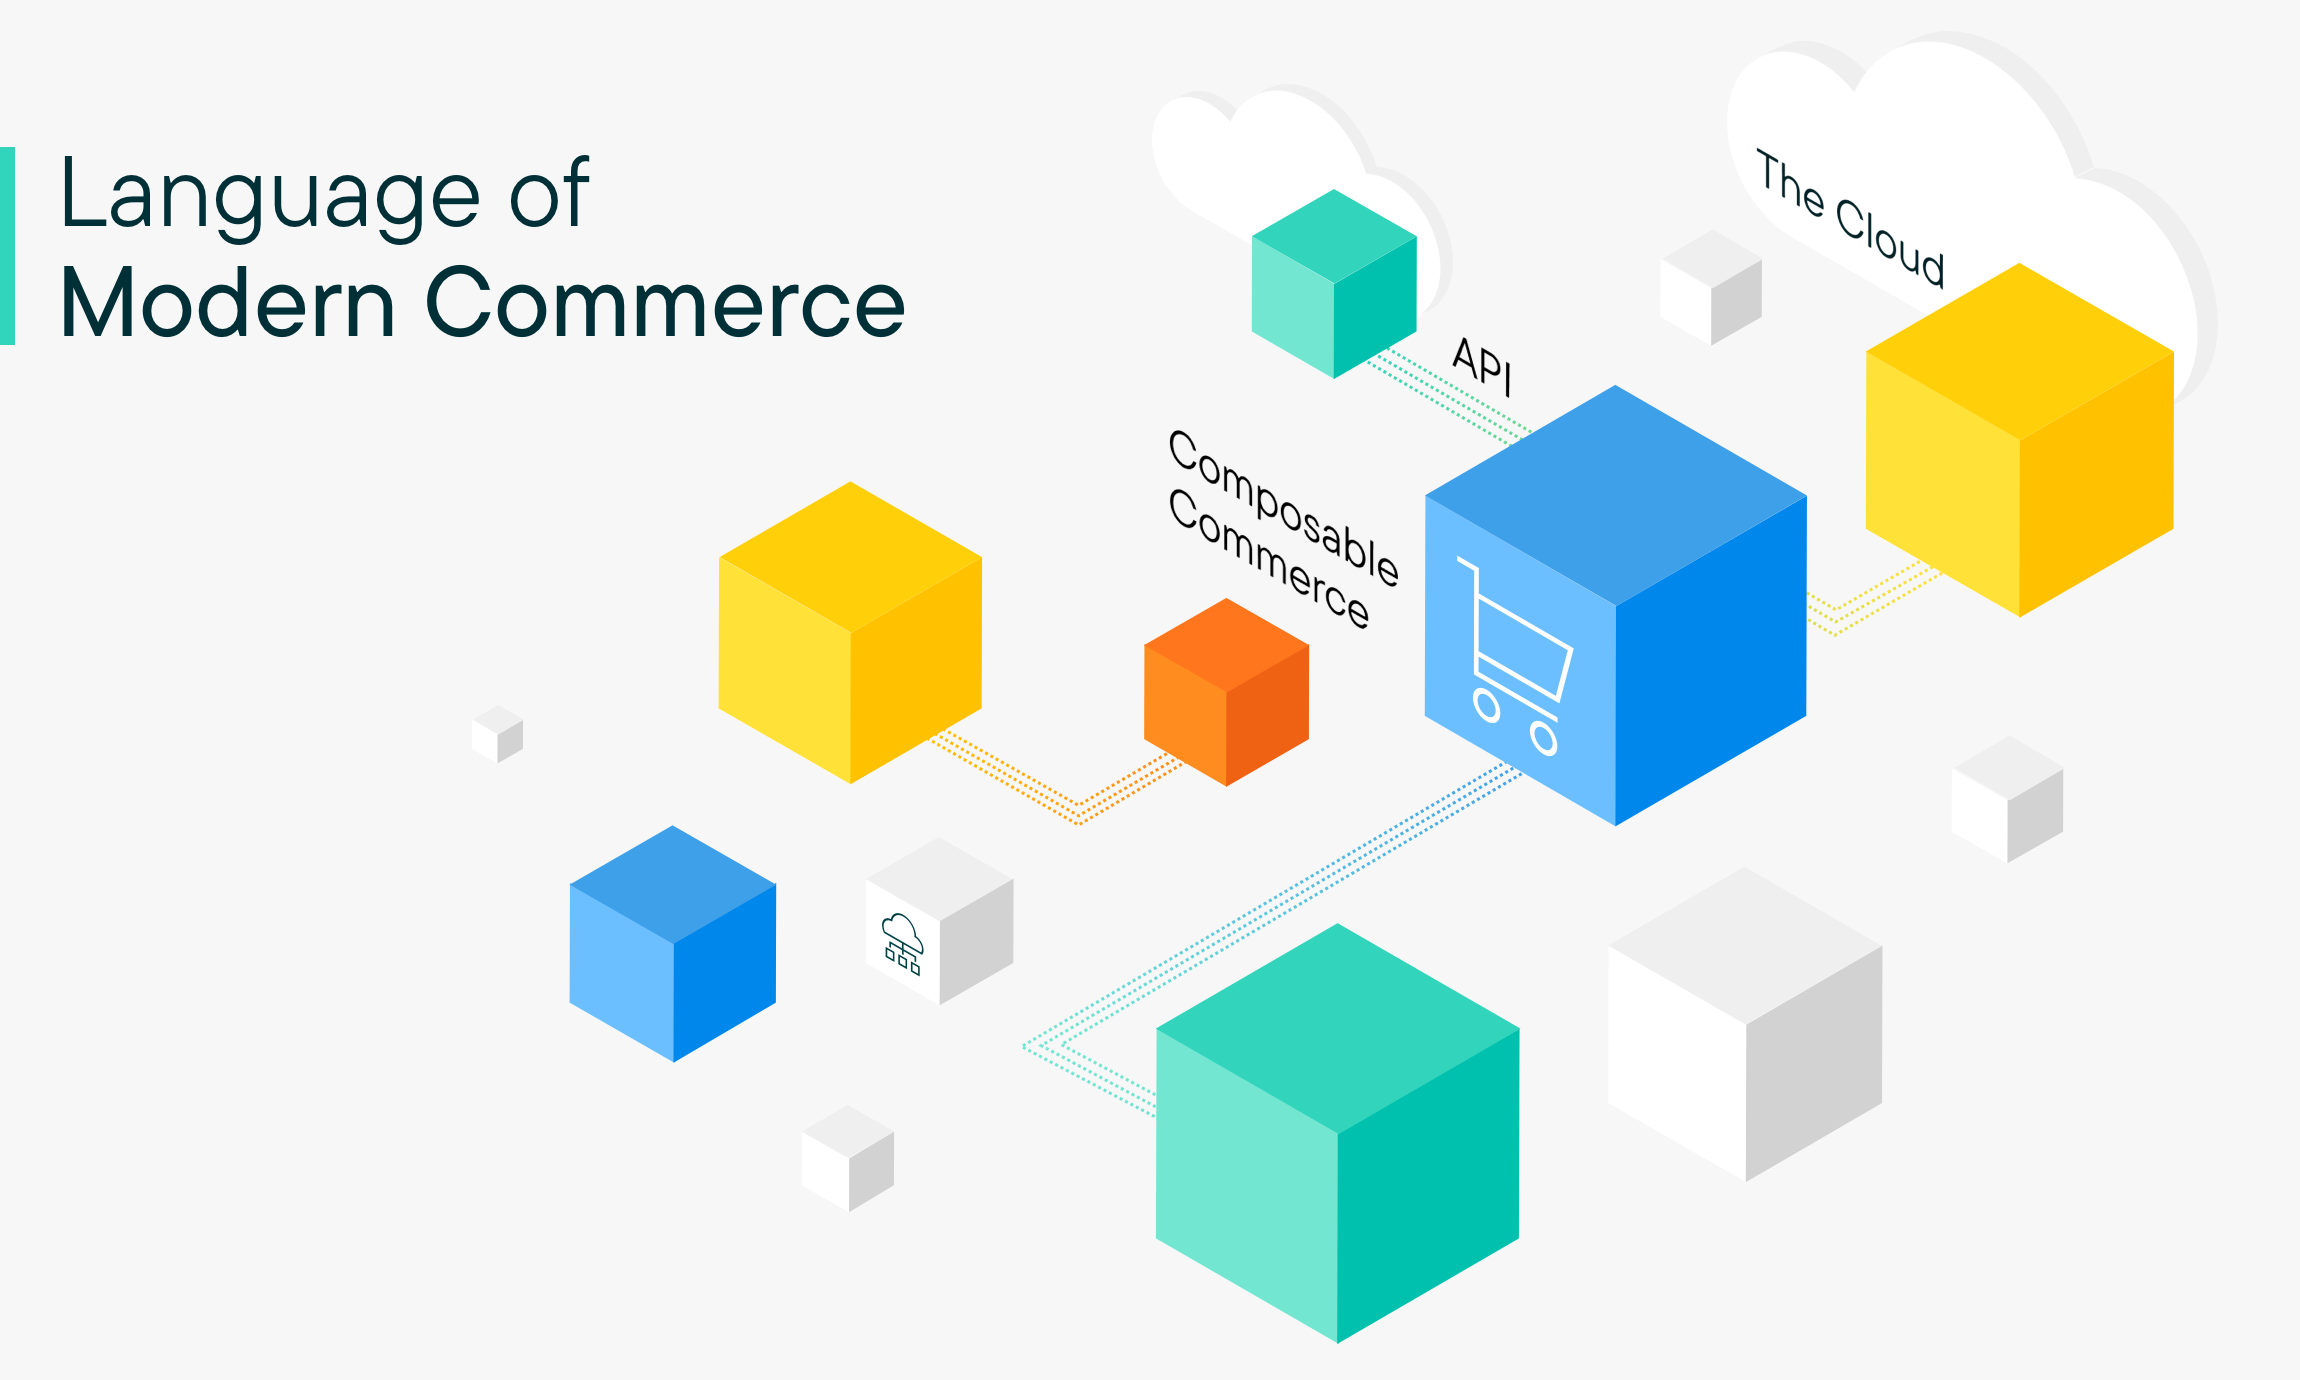 The Language of Modern Commerce: A glossary of technology terms to embrace